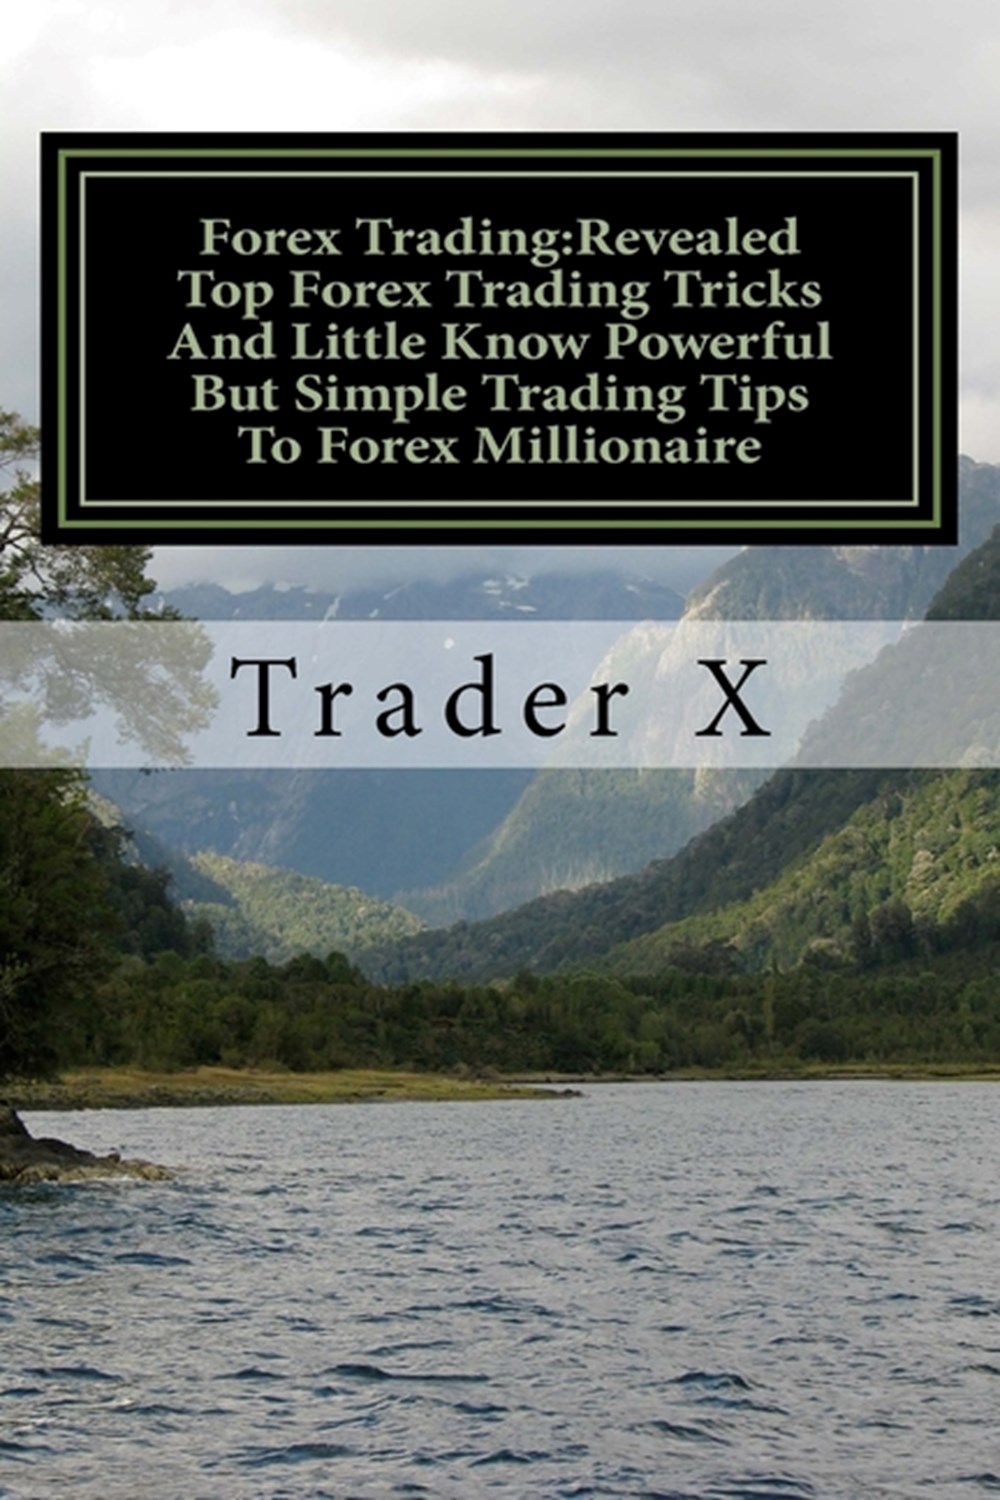 Forex Trading: Revealed Top Forex Trading Tricks And Little Know Powerful But Simple Trading Tips To